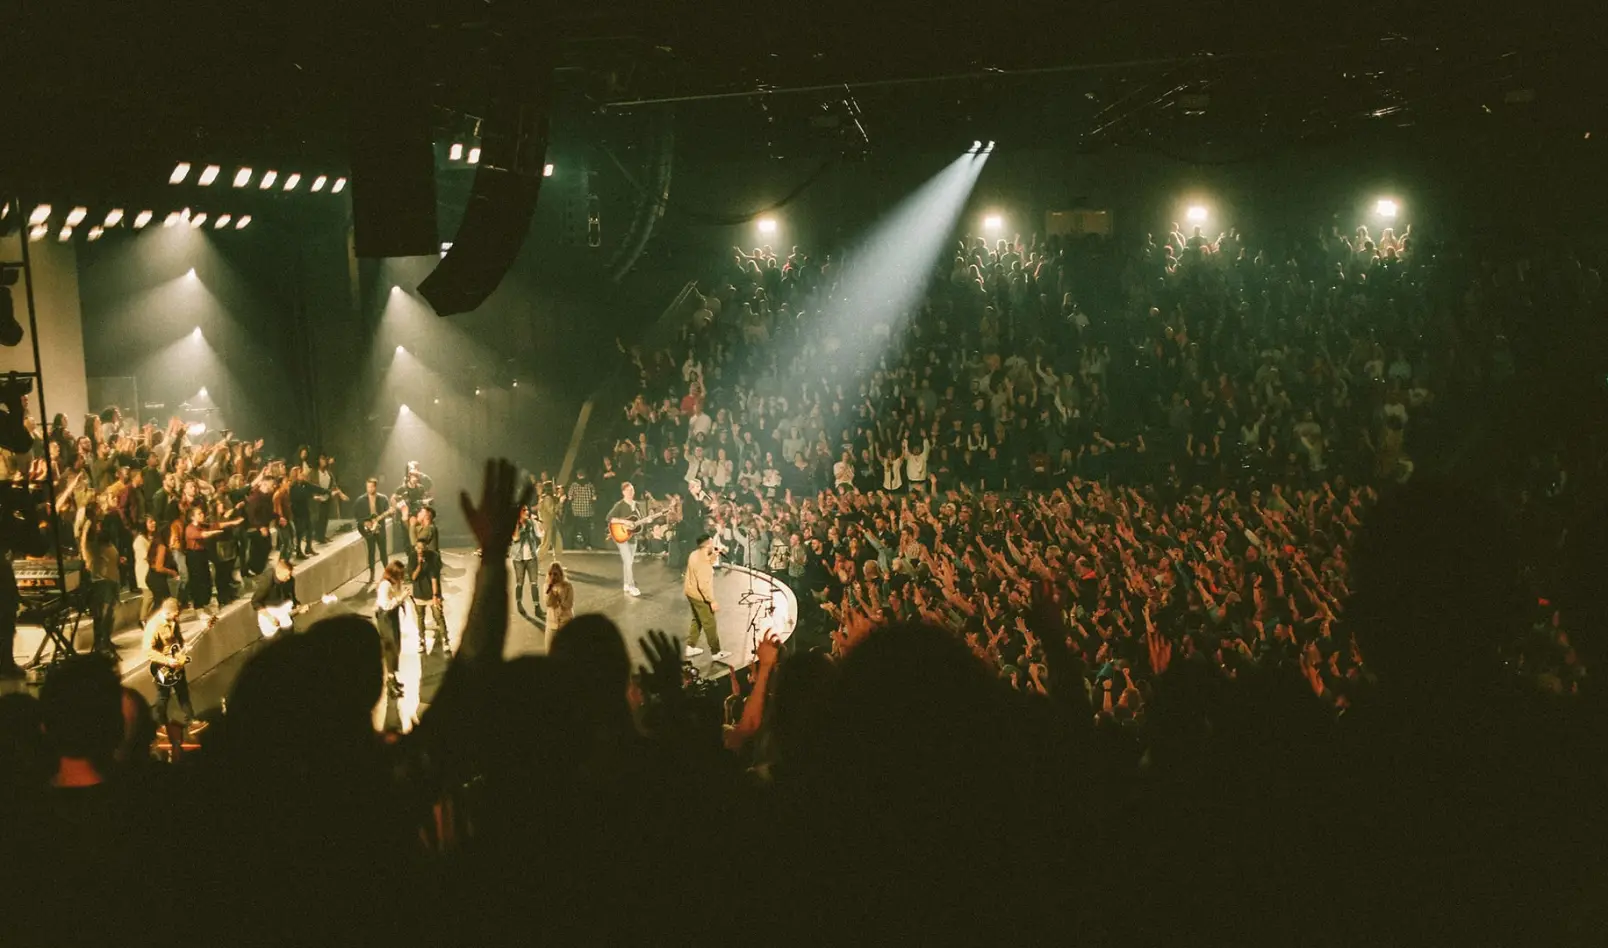 elevation worship performing in charlotte, nc